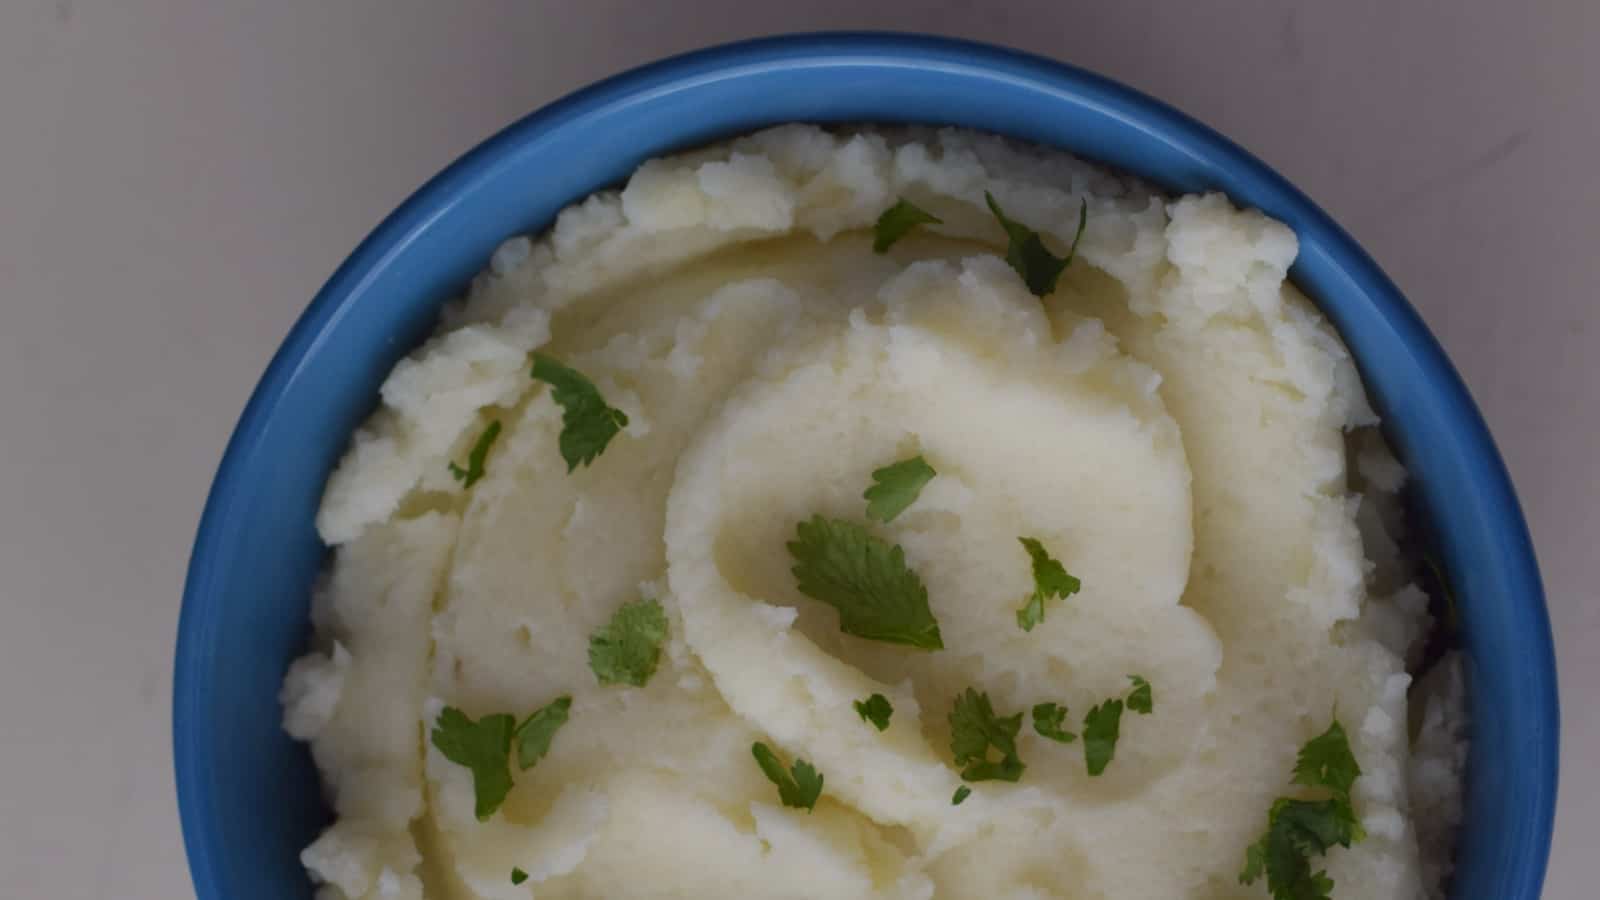 Overhead shot of a bowl of mashed potatoes in a blue bowl with parsley sprinkled over it.